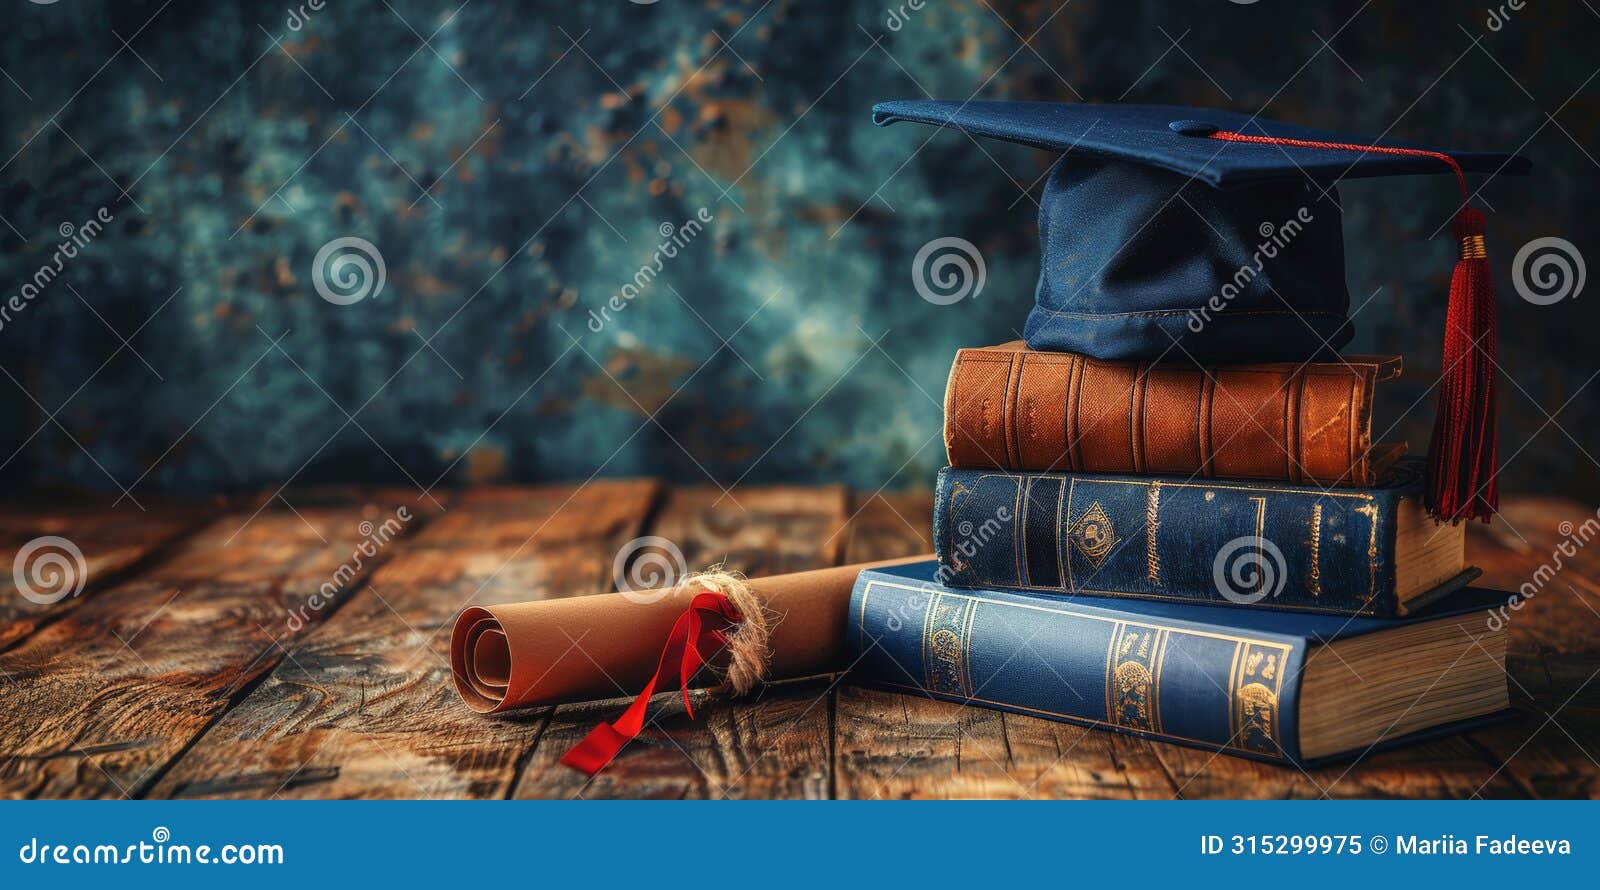 graduation cap on a stack of old books, ideal for education themes. graduation time in educational institutions